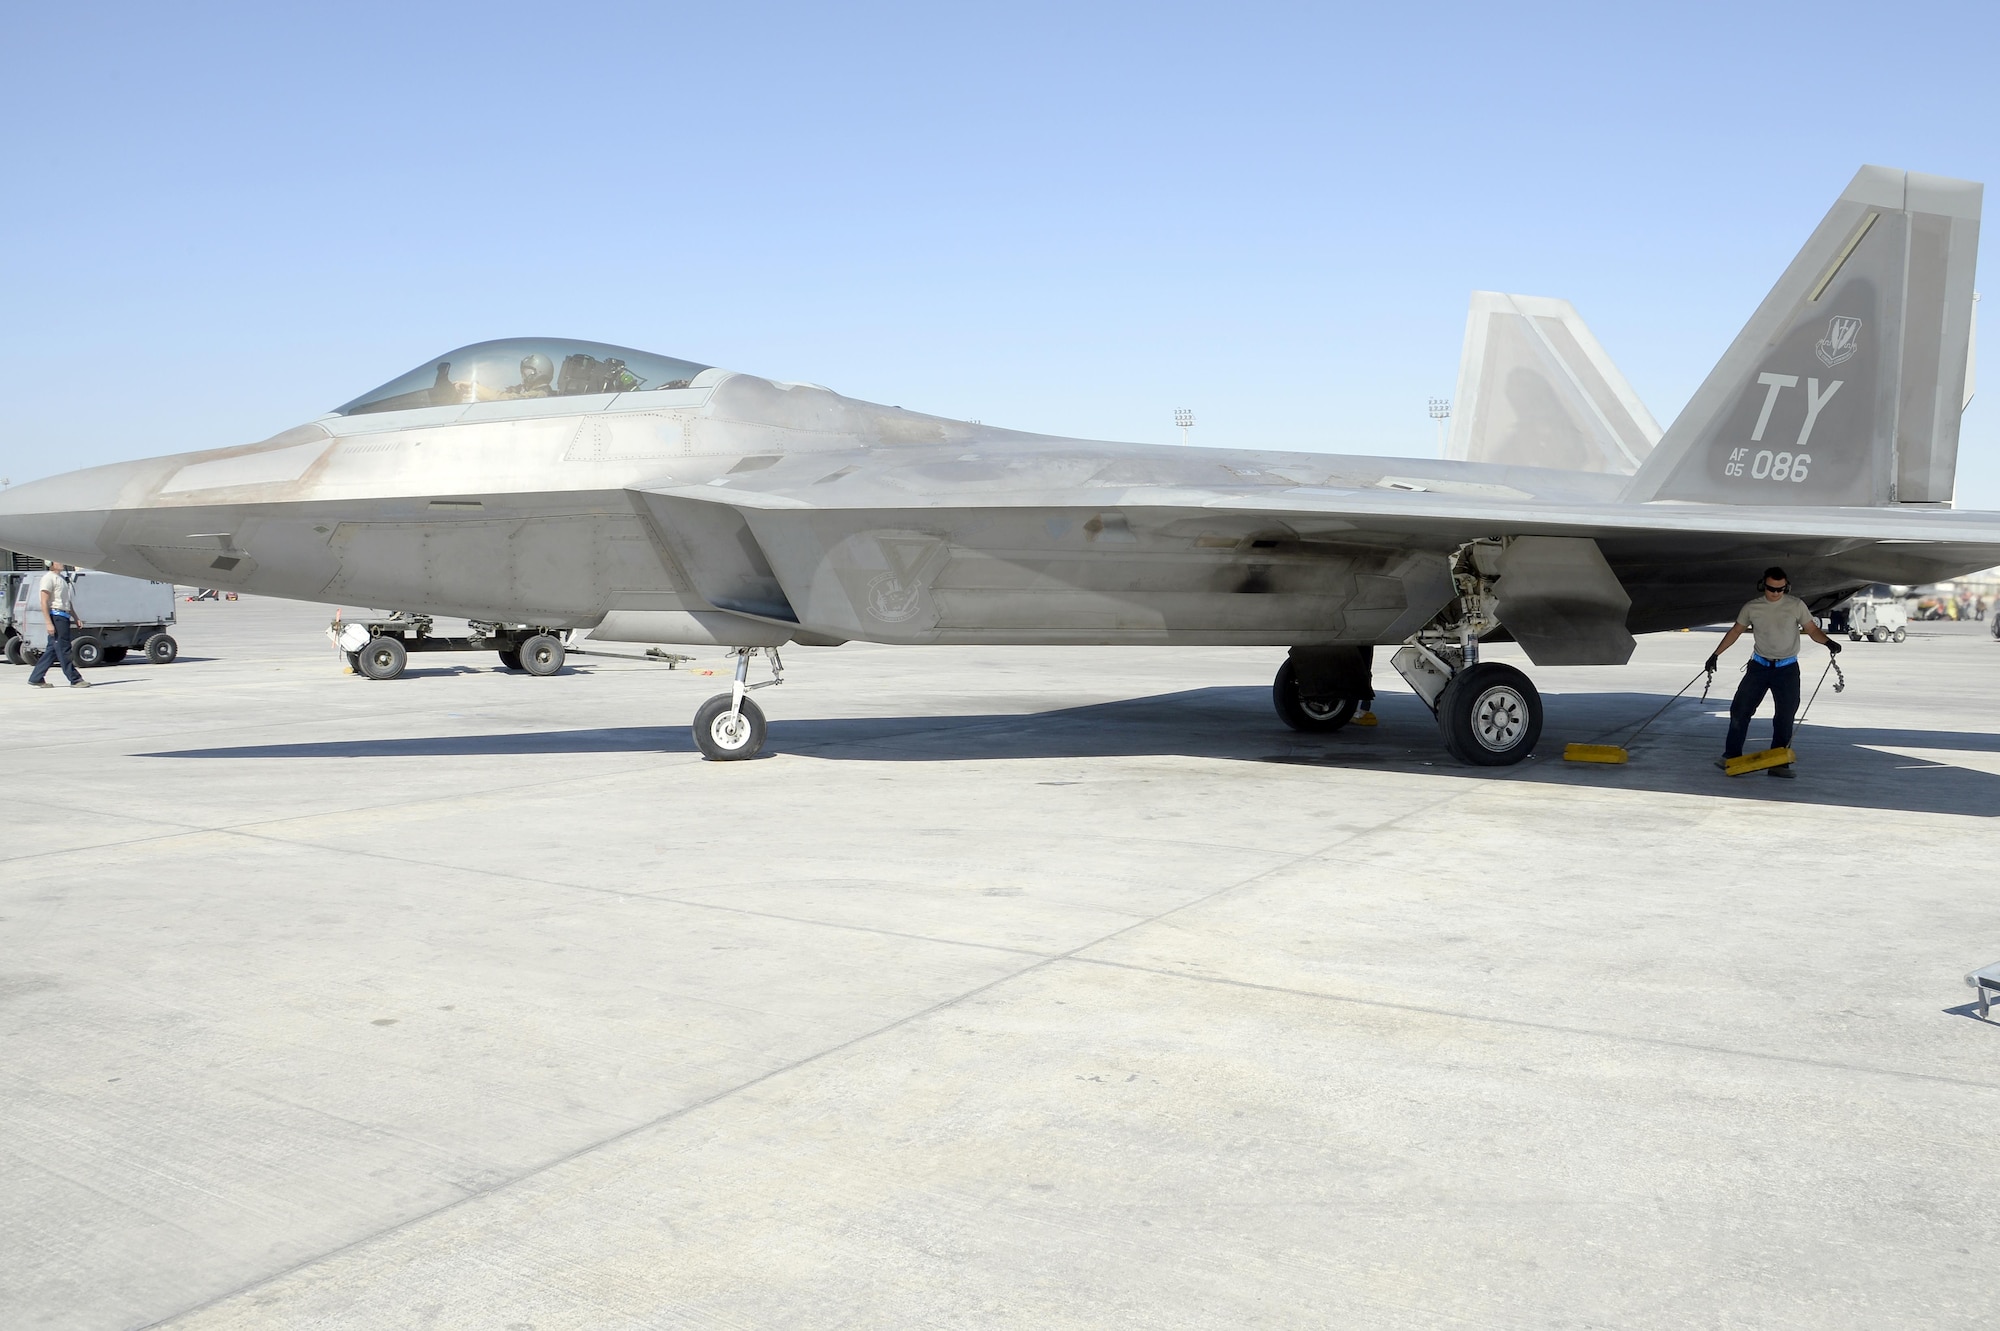 Senior Airman Dakota, launch assist, pulls chalks from an F-22 Raptor at an undisclosed location in Southwest Asia Jan. 26, 2015. Four different specialties work together to get the F-22 Raptor in the air. Dakota is currently deployed from Tyndall Air Force Base, Fla., and is a native of El Paso, Texas. (U.S. Air Force/Tech. Sgt. Marie Brown)
